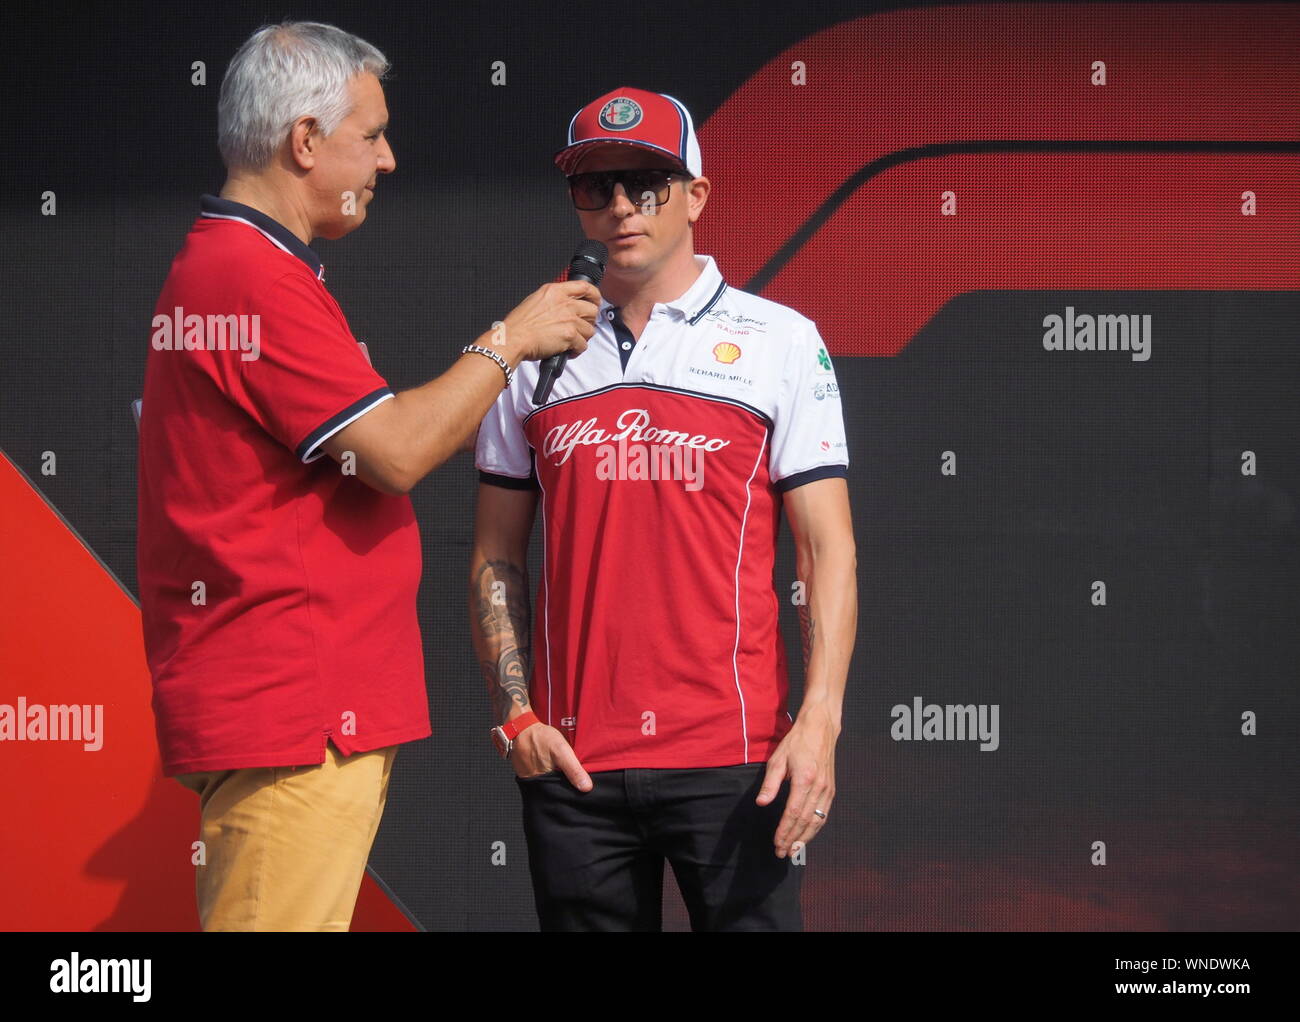 Monza, Italy 5 September 2019: Driver Kimi Raikkonen presented at fans and interviewed on Monza circuit. Stock Photo